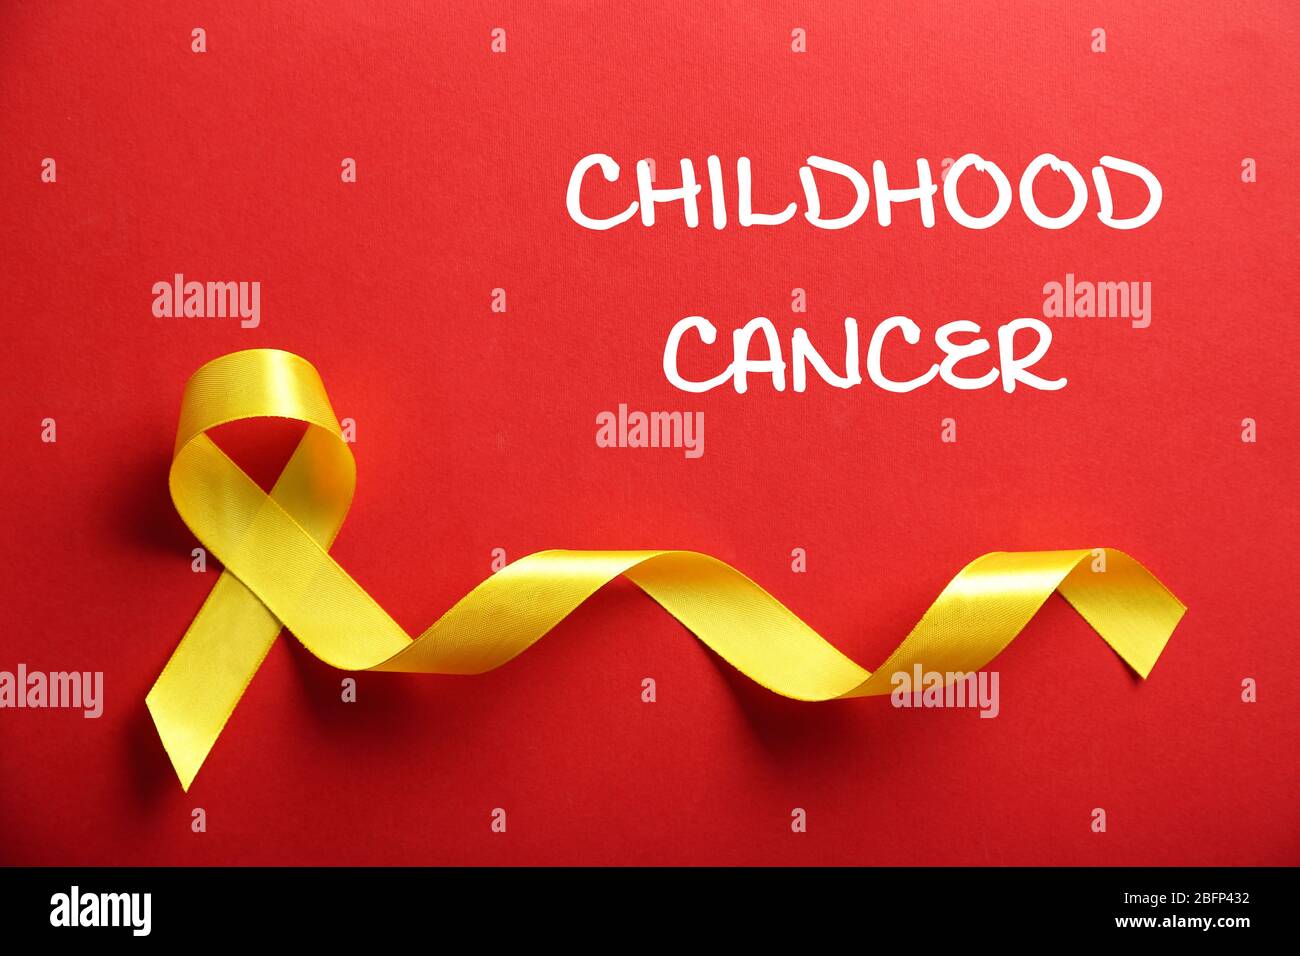 Yellow ribbon and text Childhood Cancer on red background Stock Photo